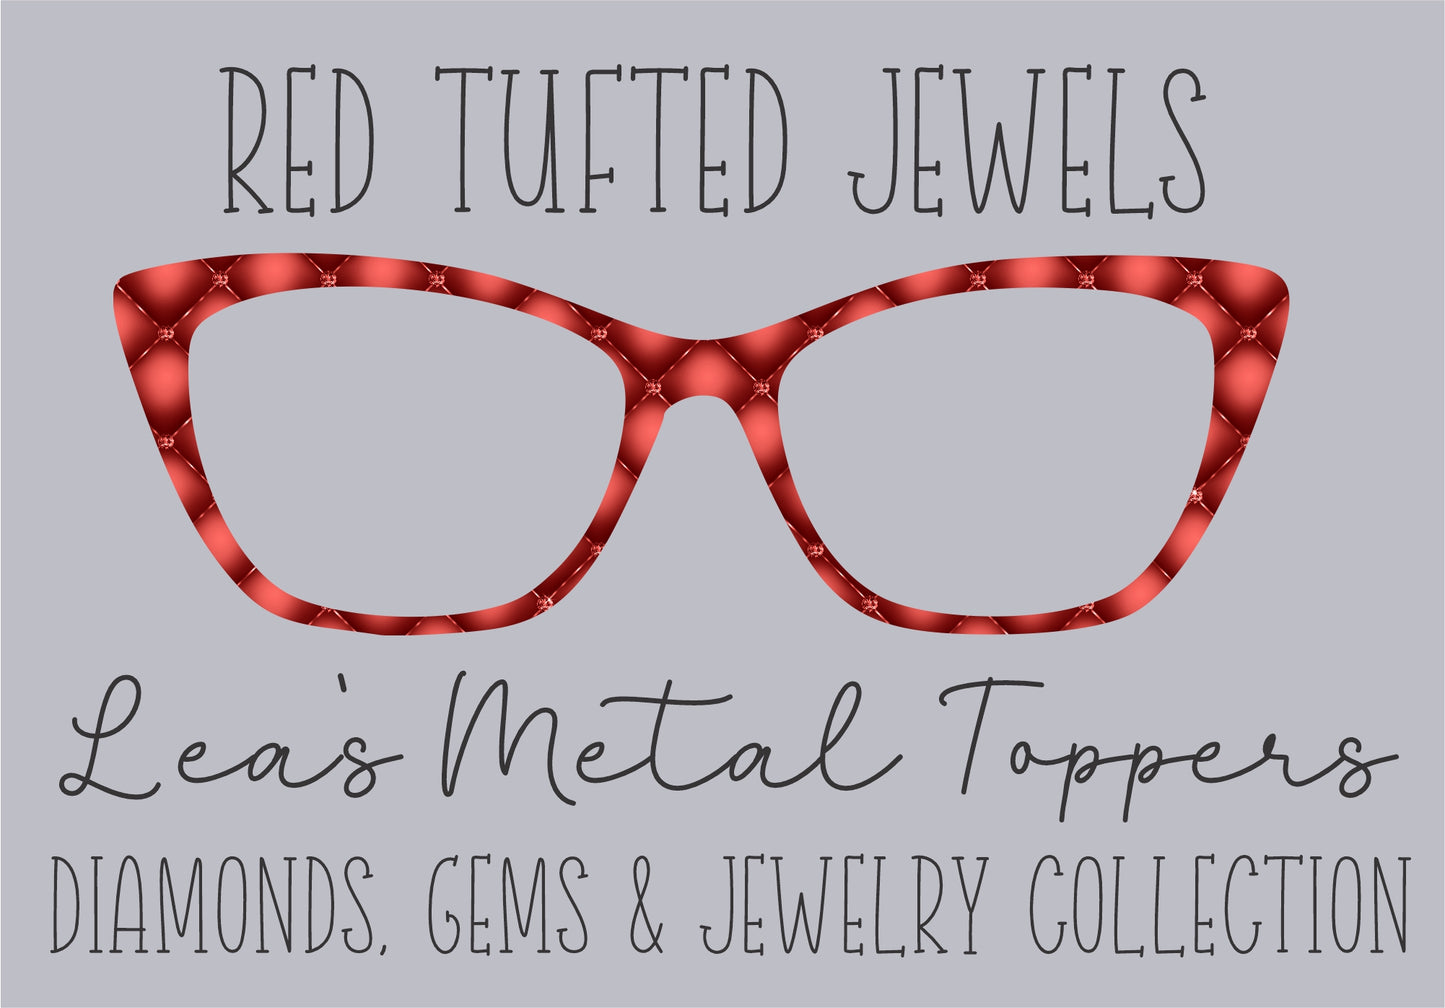 RED TUFTED JEWELS Eyewear Frame Toppers COMES WITH MAGNETS